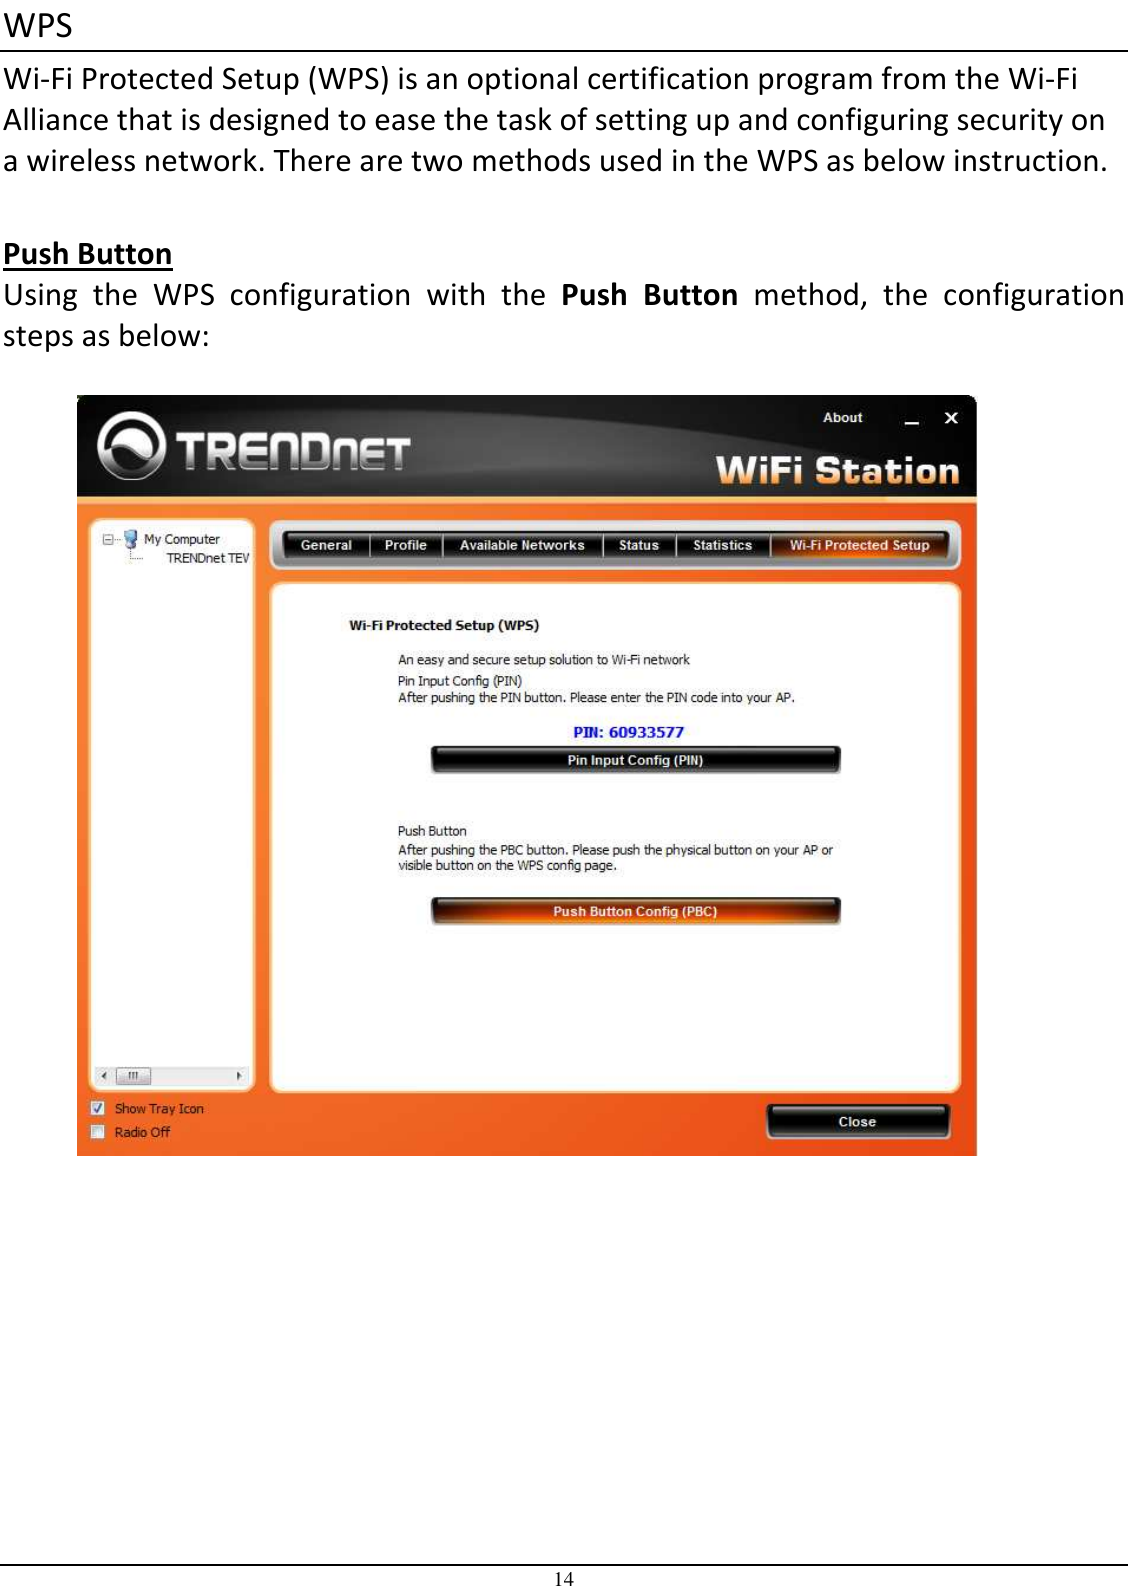  14 WPS Wi-Fi Protected Setup (WPS) is an optional certification program from the Wi-Fi Alliance that is designed to ease the task of setting up and configuring security on a wireless network. There are two methods used in the WPS as below instruction.  Push Button Using  the  WPS  configuration  with  the  Push  Button  method,  the  configuration steps as below:     